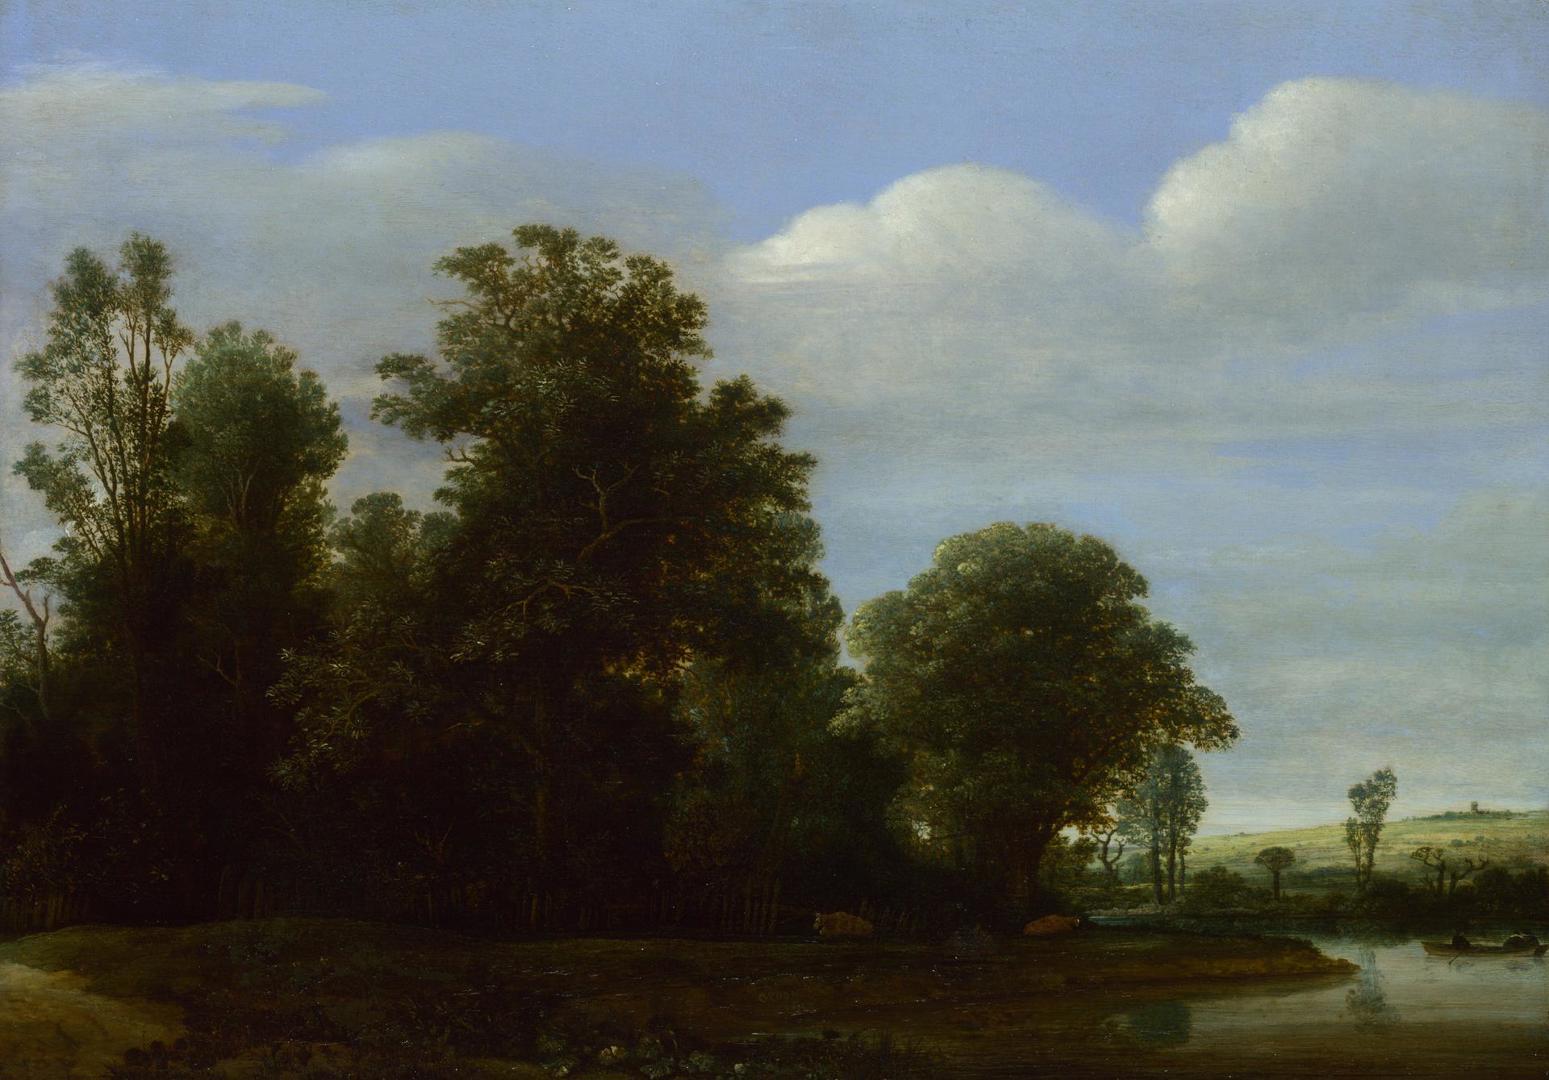 A Landscape with a River by a Wood by Cornelis Vroom